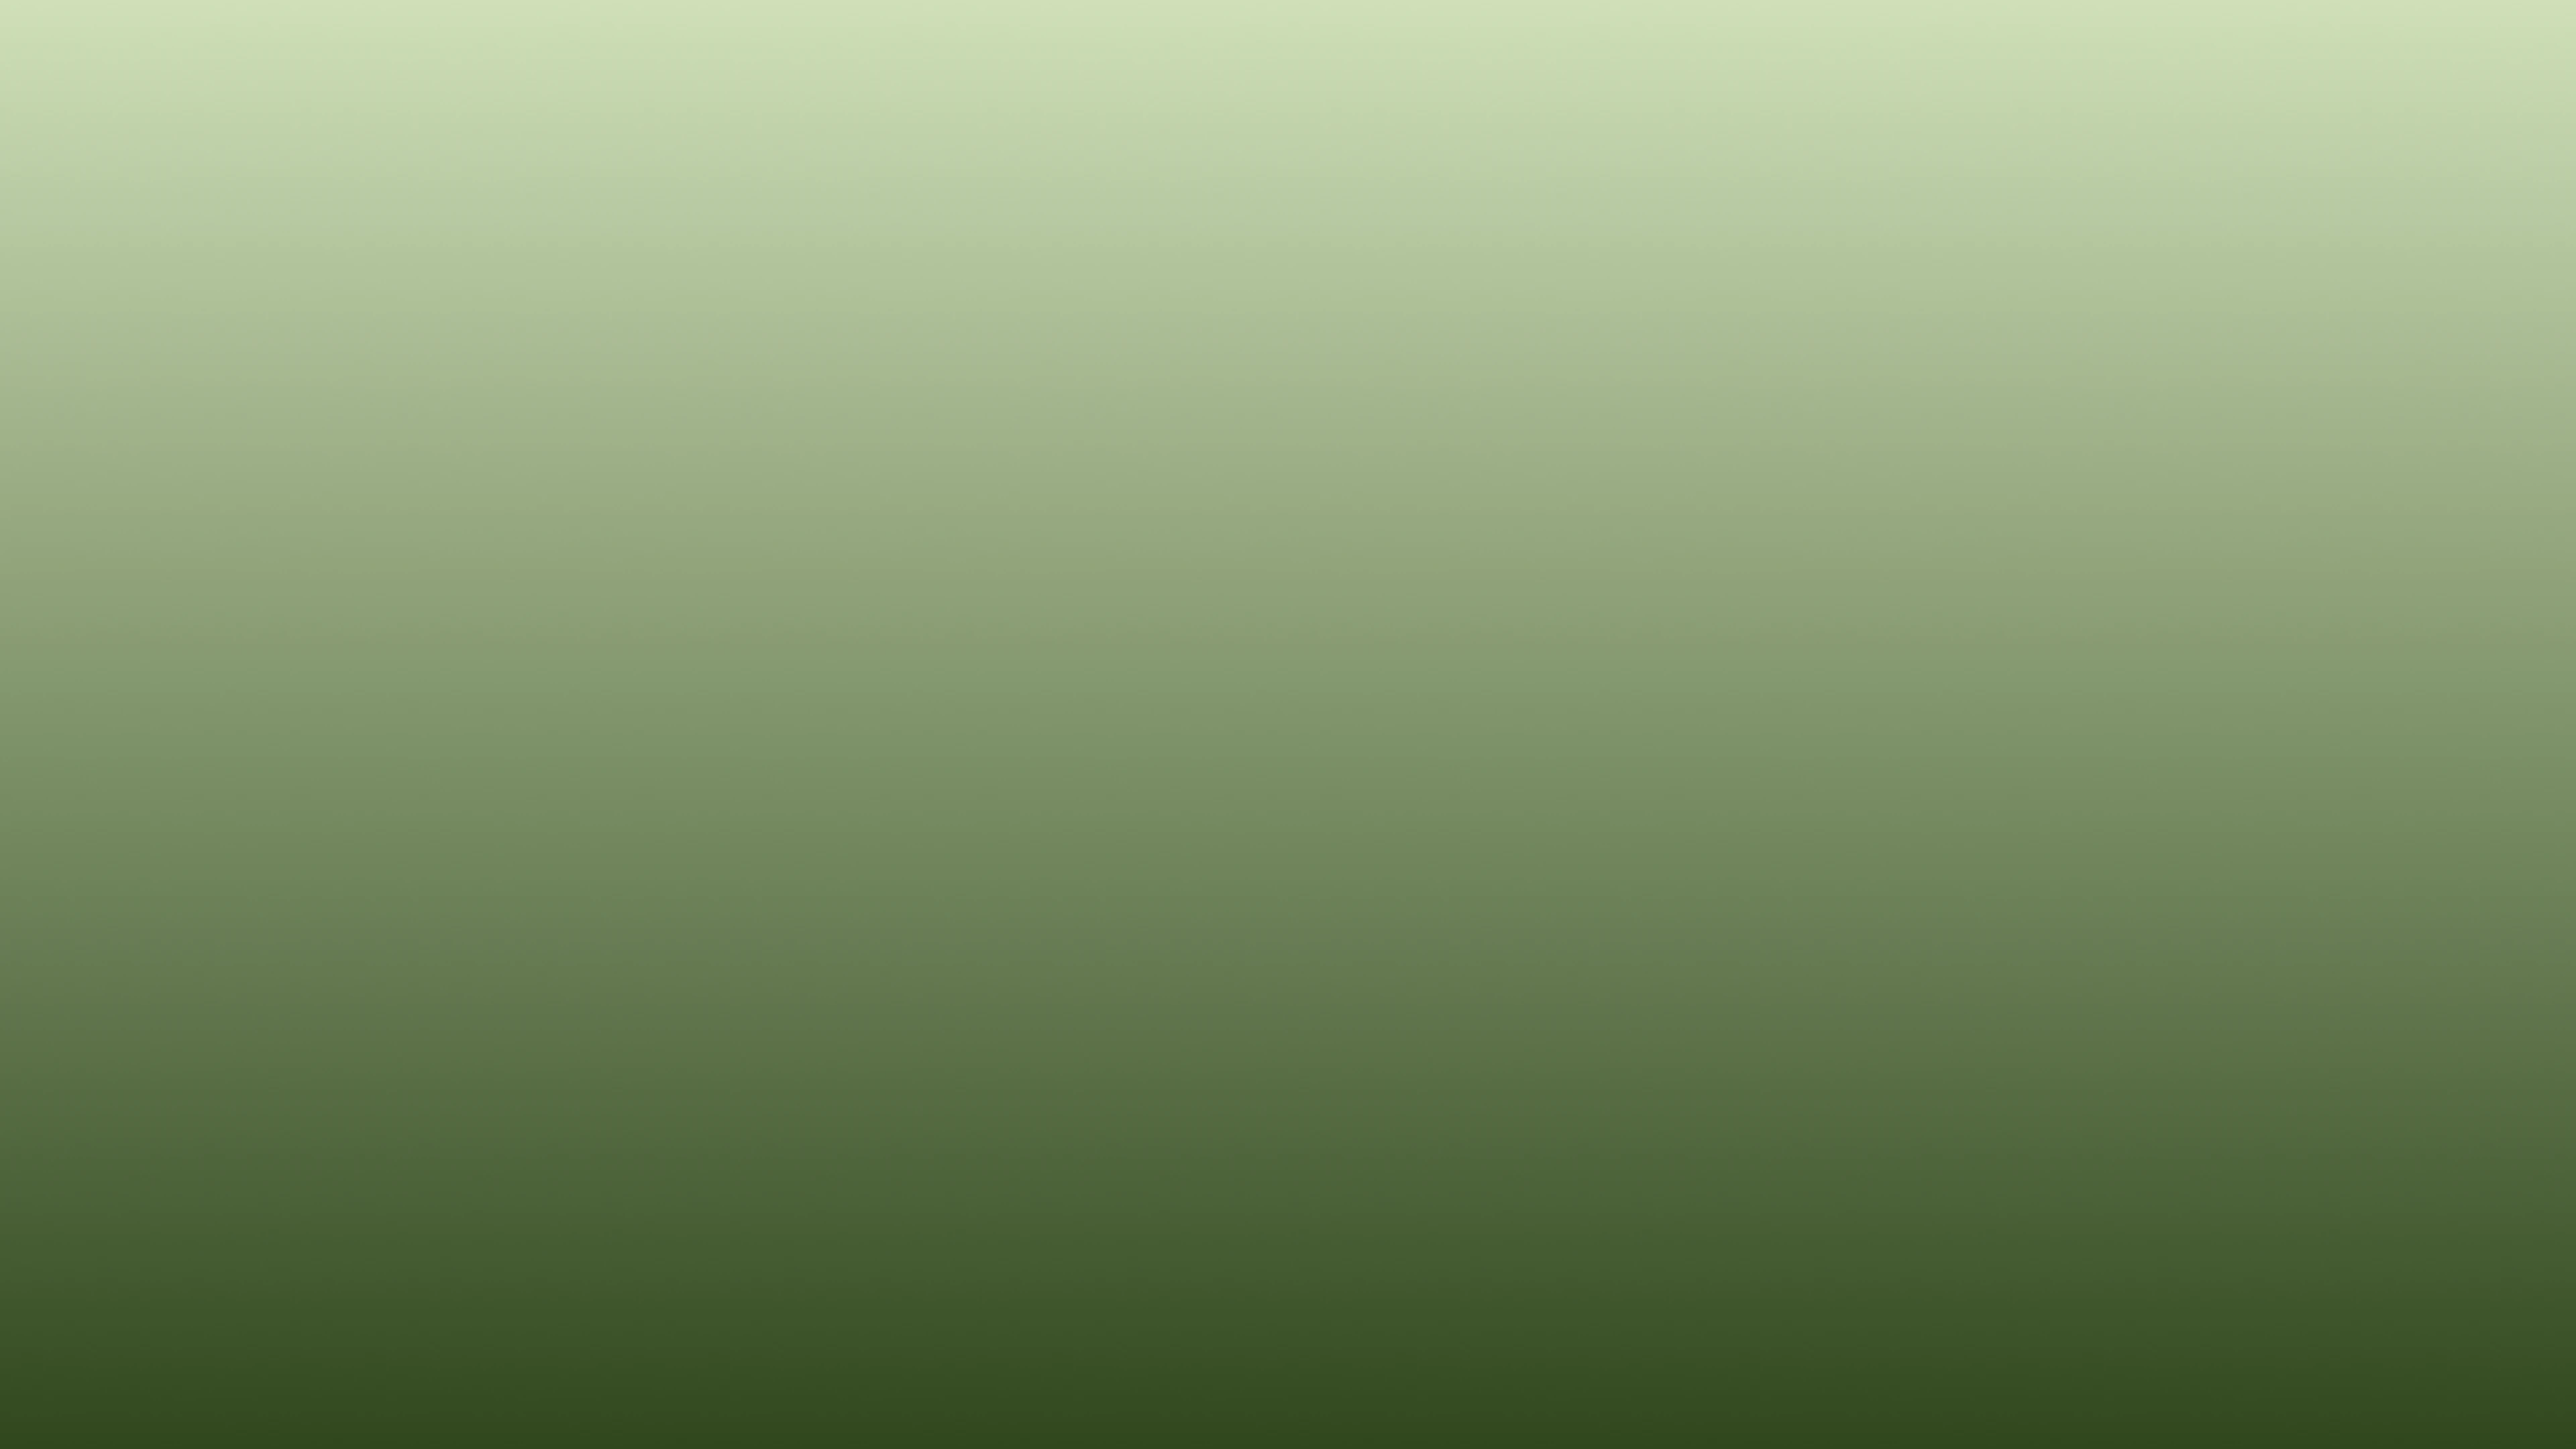 Background image of a gradient green colour